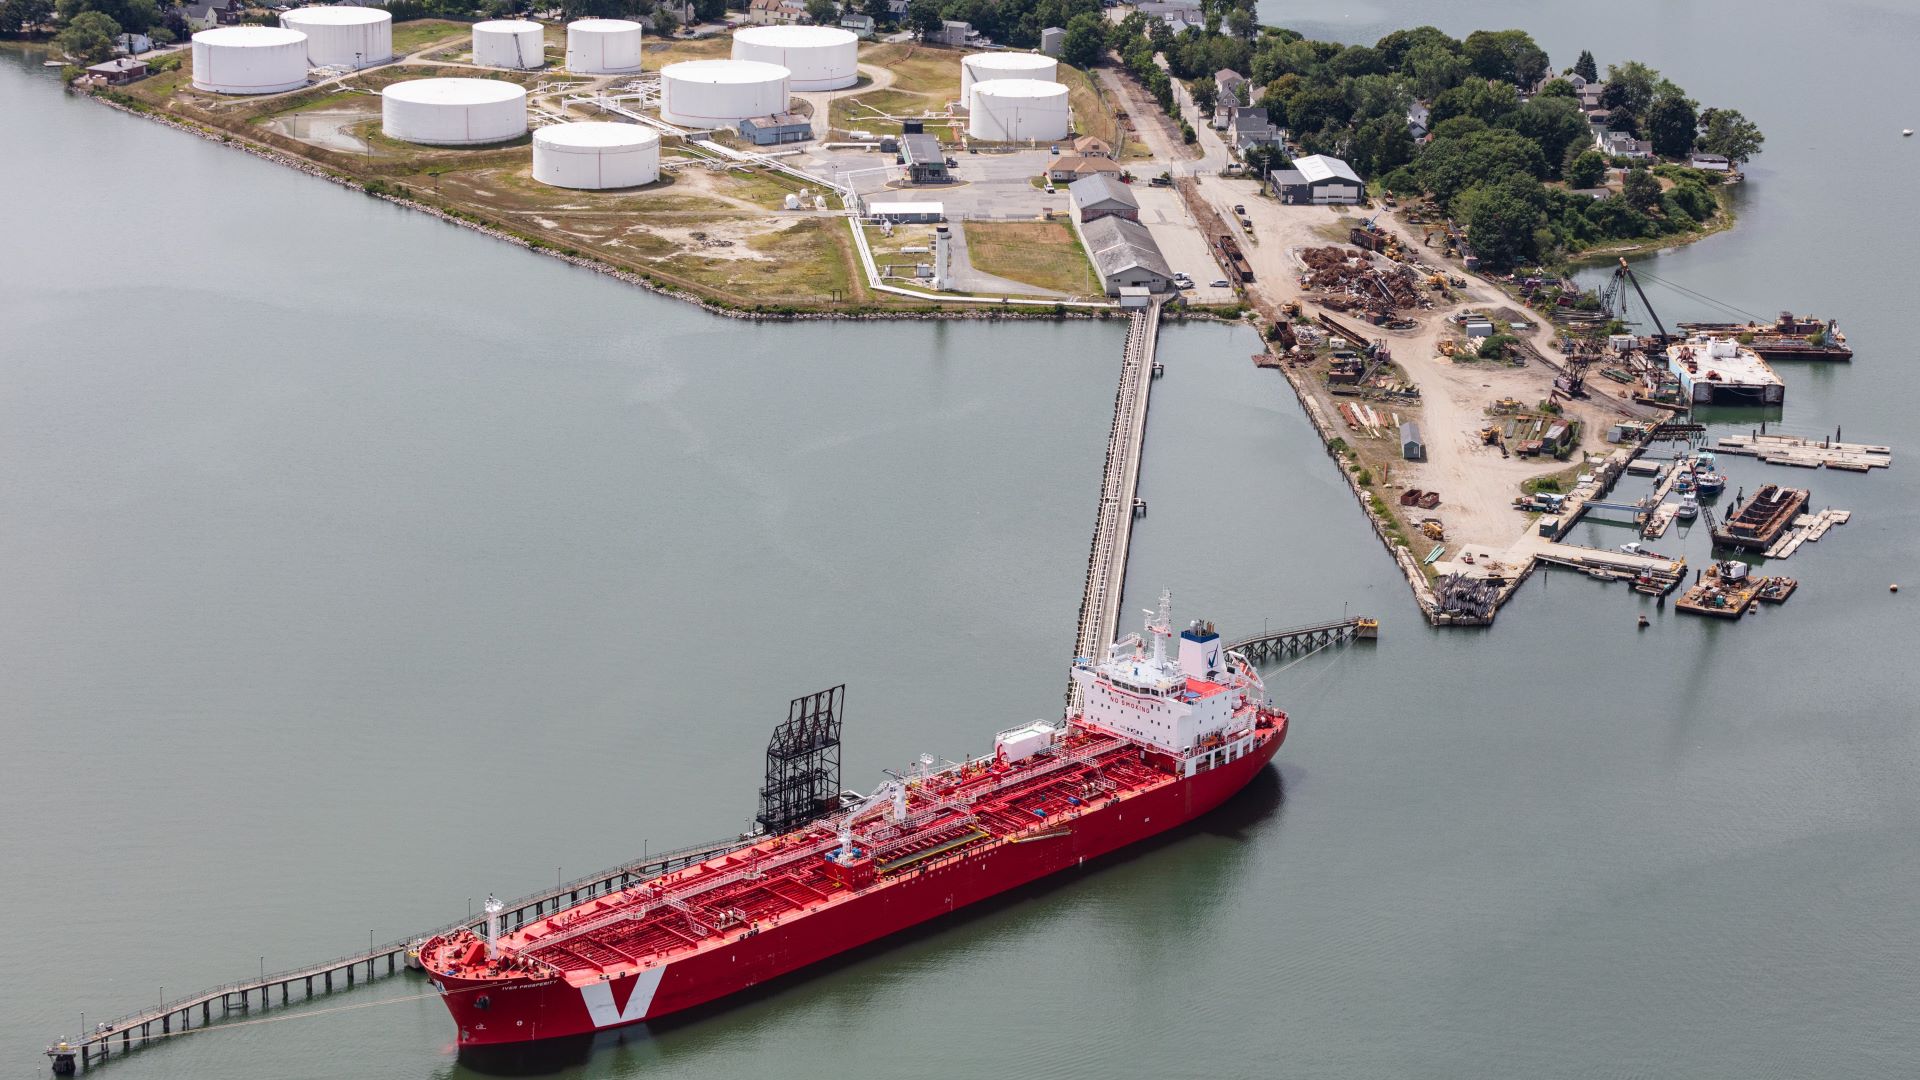 A red oil tanker near the petroleum tanks of South Portland